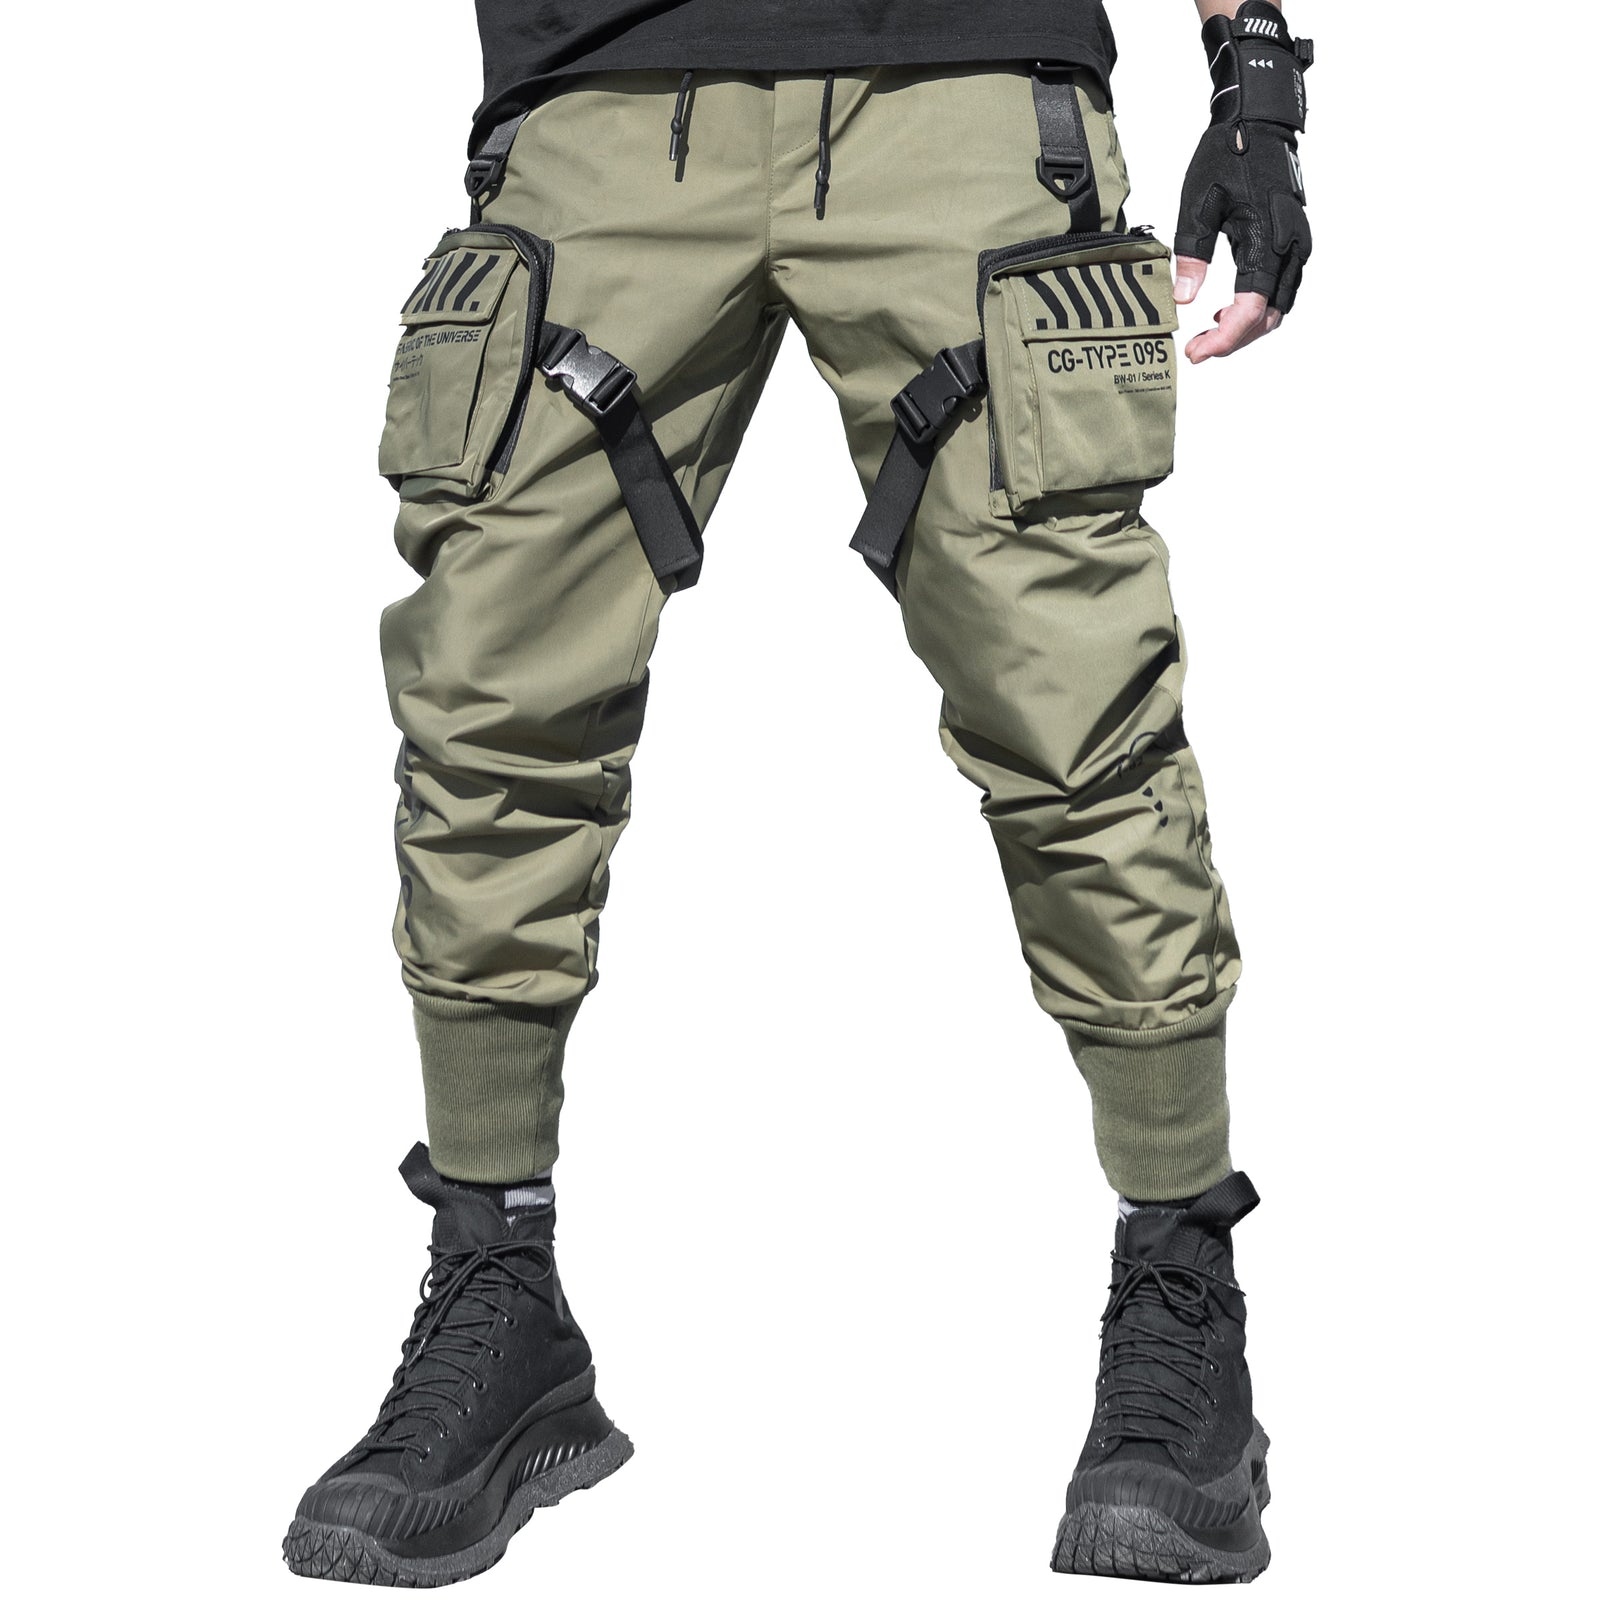 Buy WQEnergy Mens Work Wear Workout Fitness Gym Military Baggy Cargo Pants  Army Green 38 at Amazonin